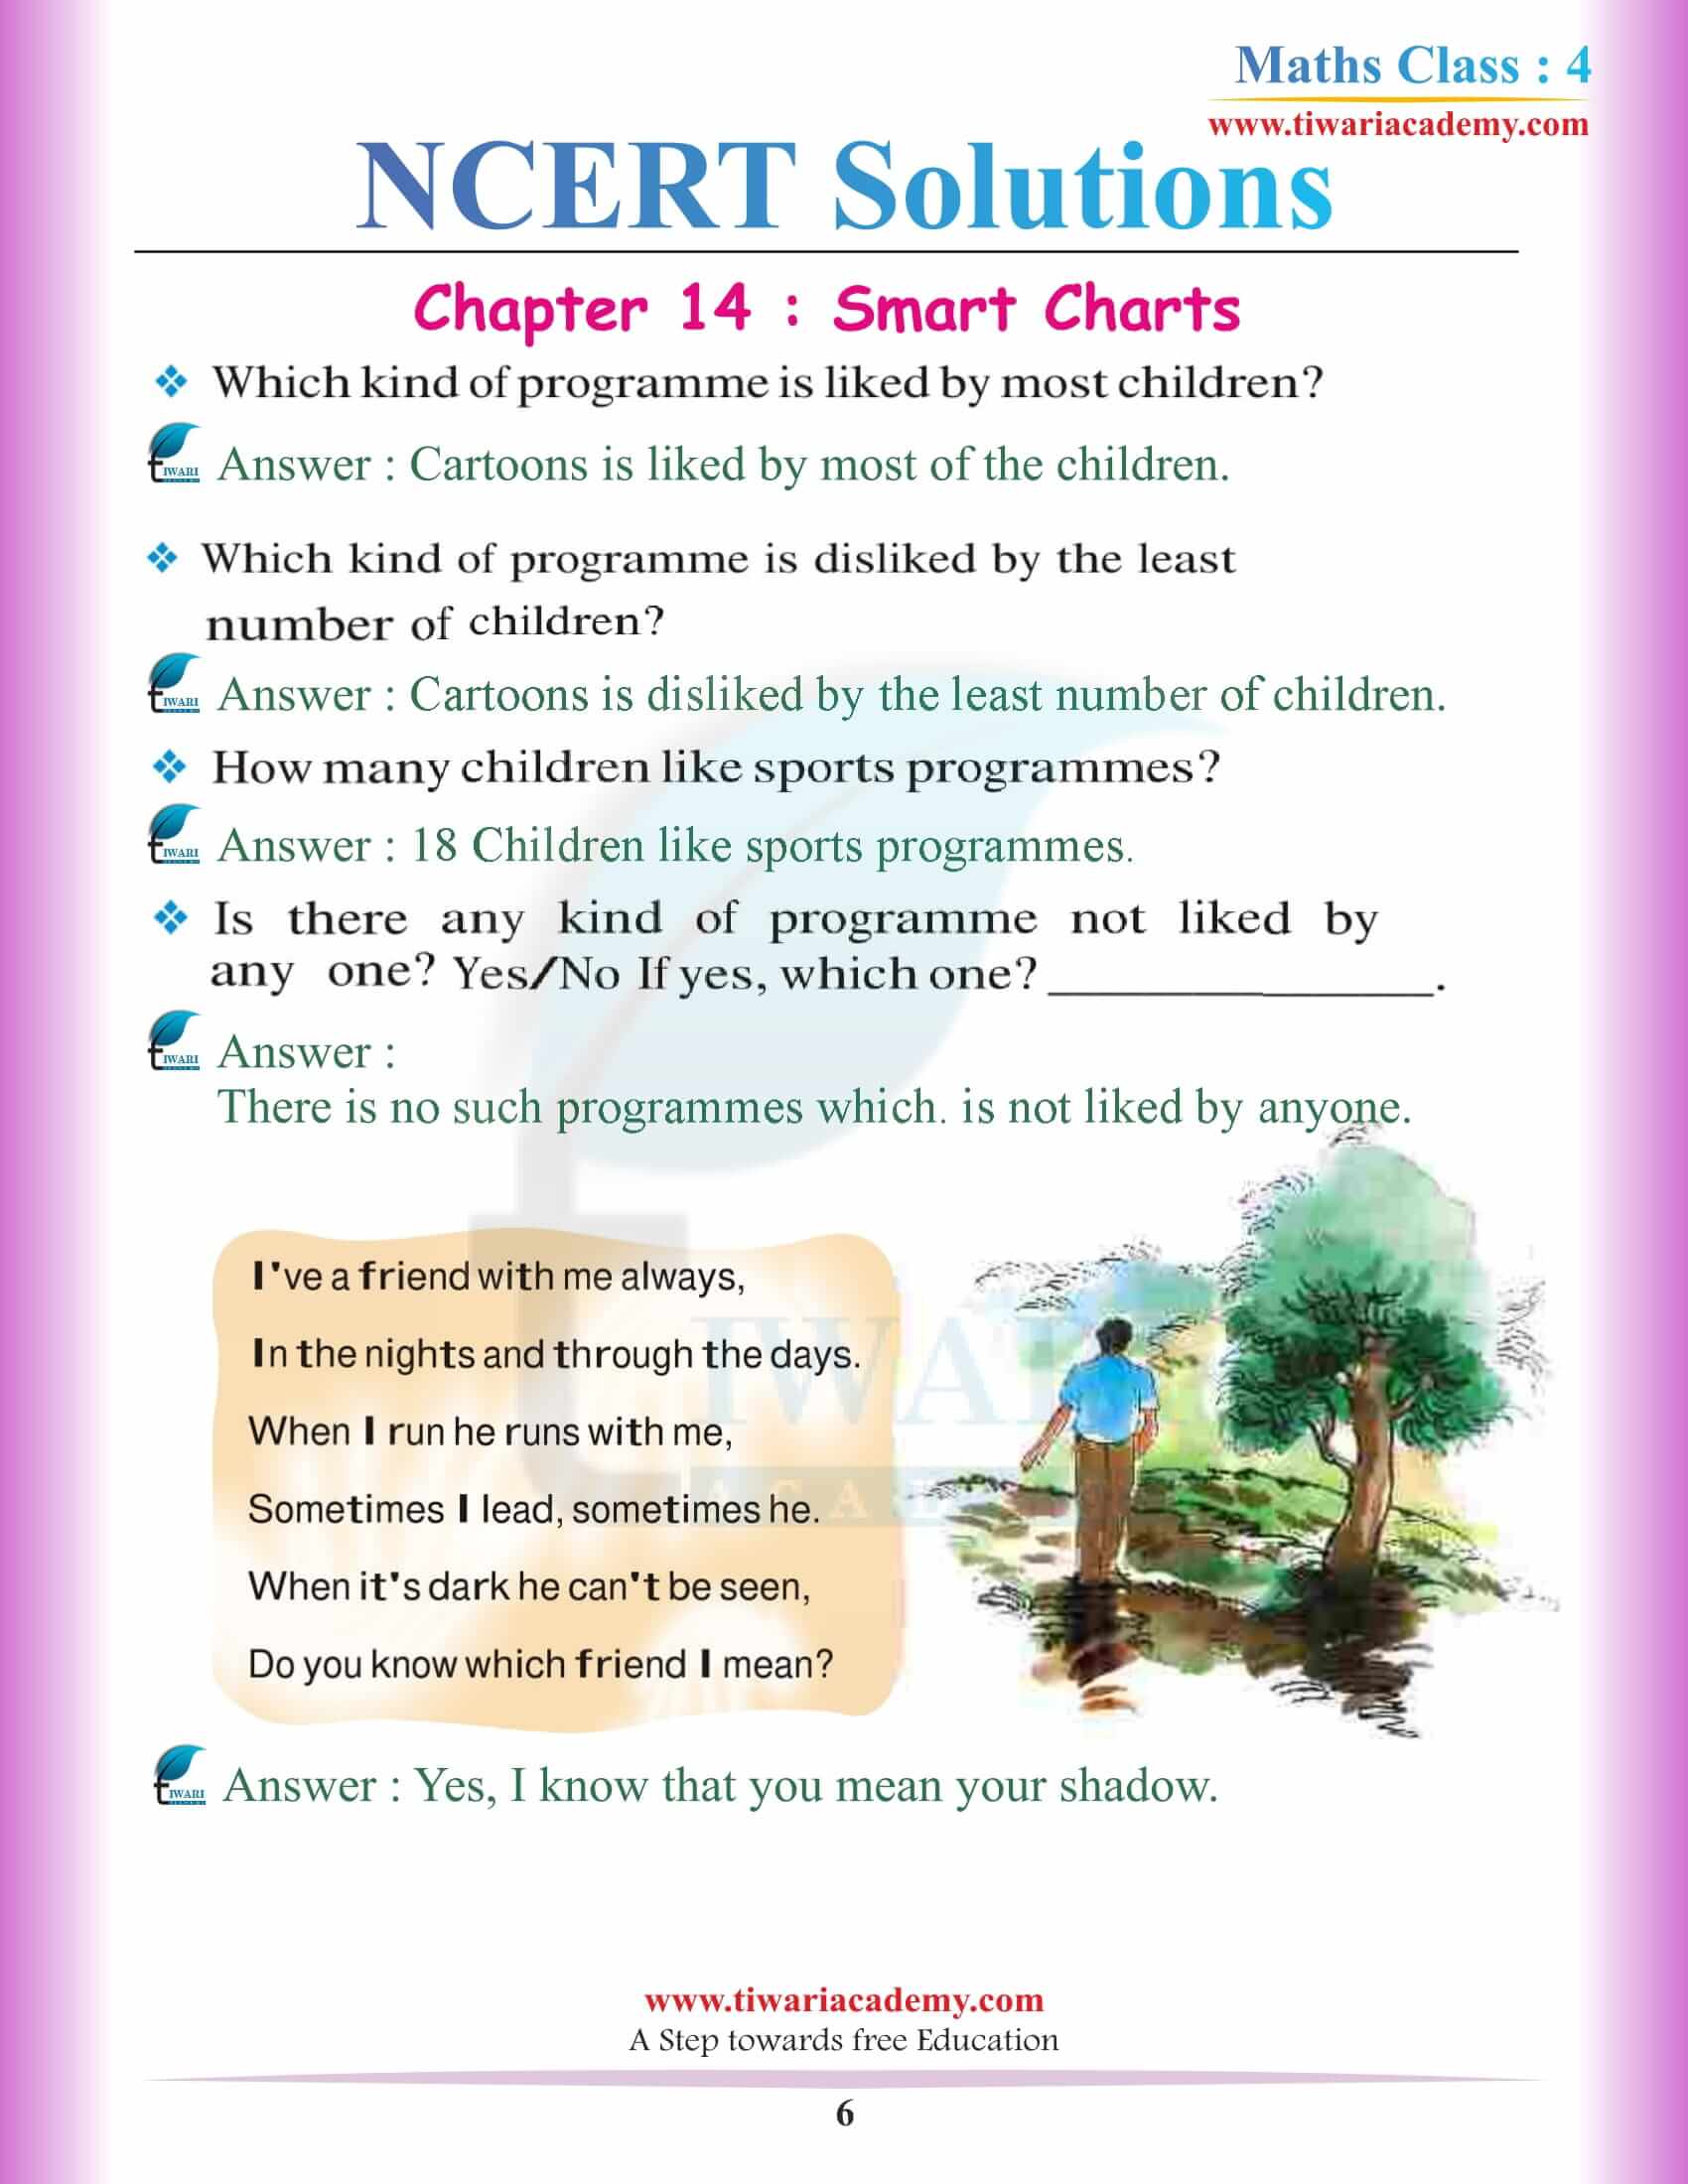 NCERT Solutions for Class 4 Maths Chapter 14 free guide